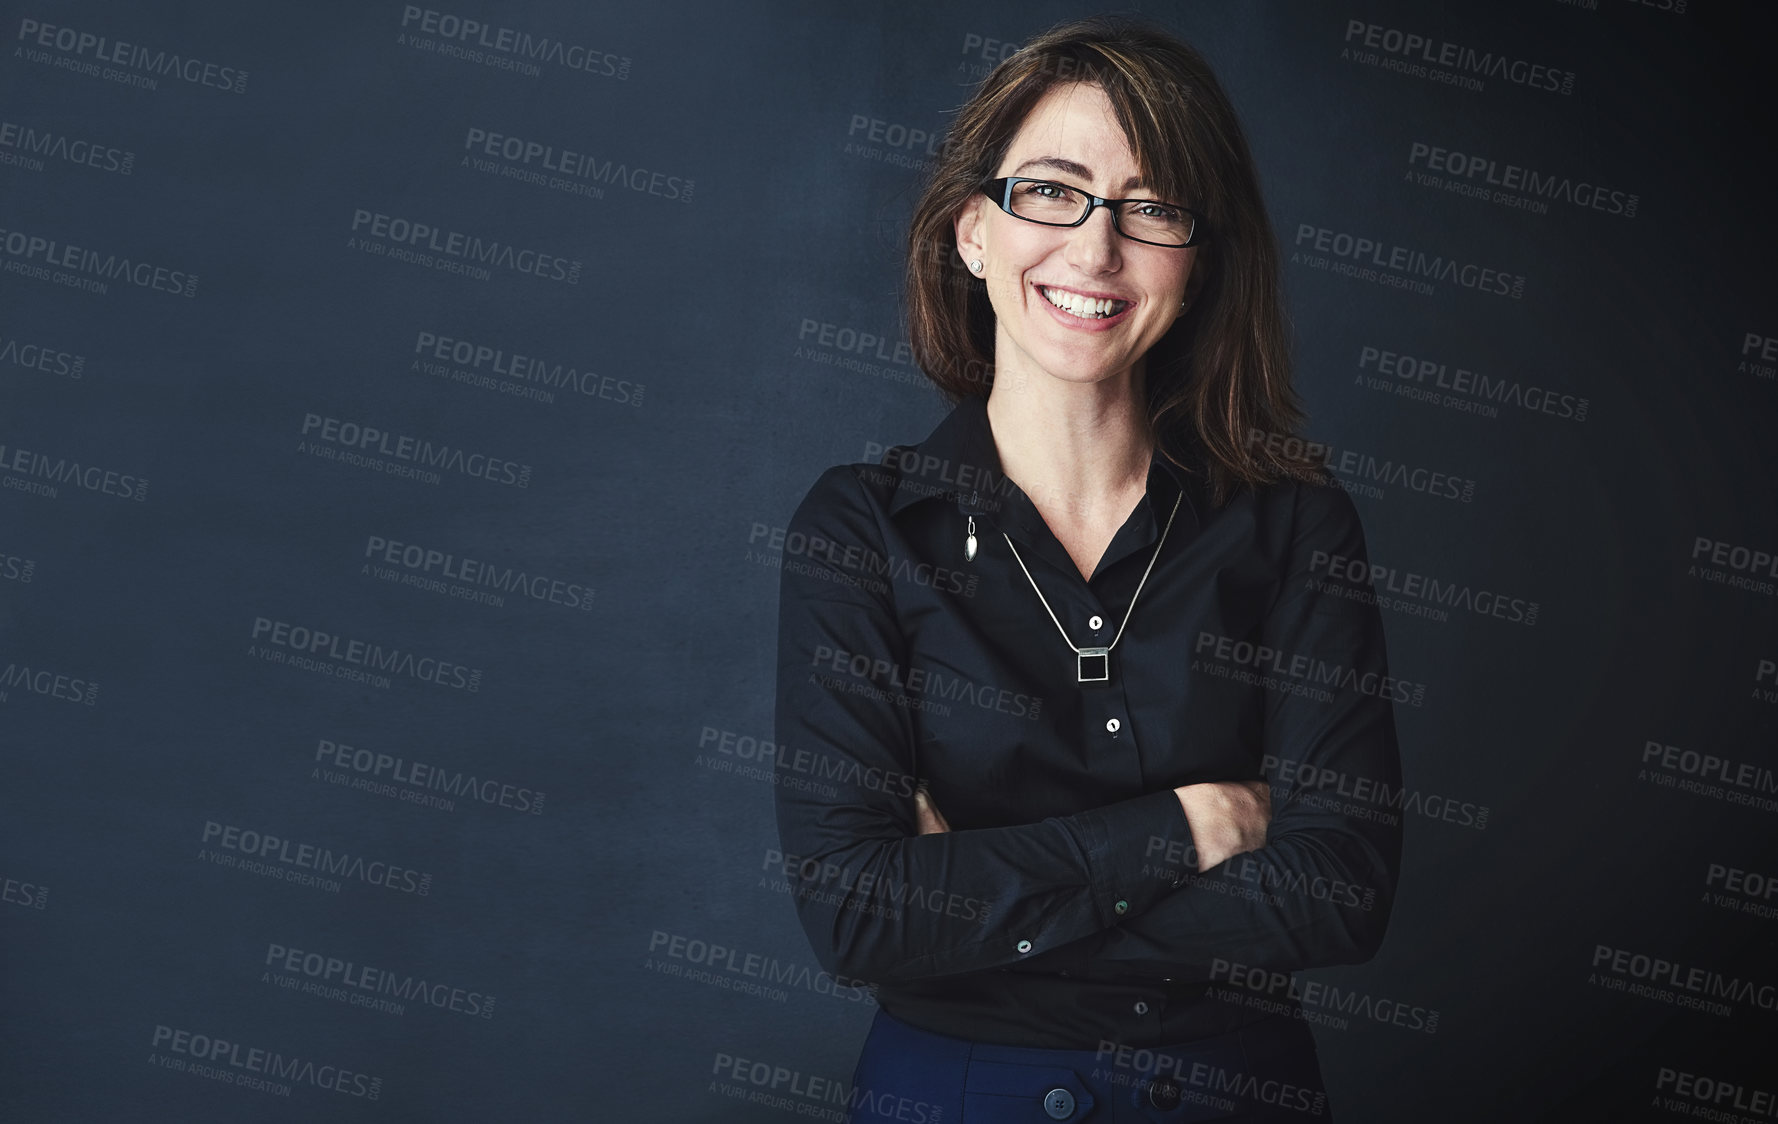 Buy stock photo Studio portrait of a corporate businesswoman posing against a dark background